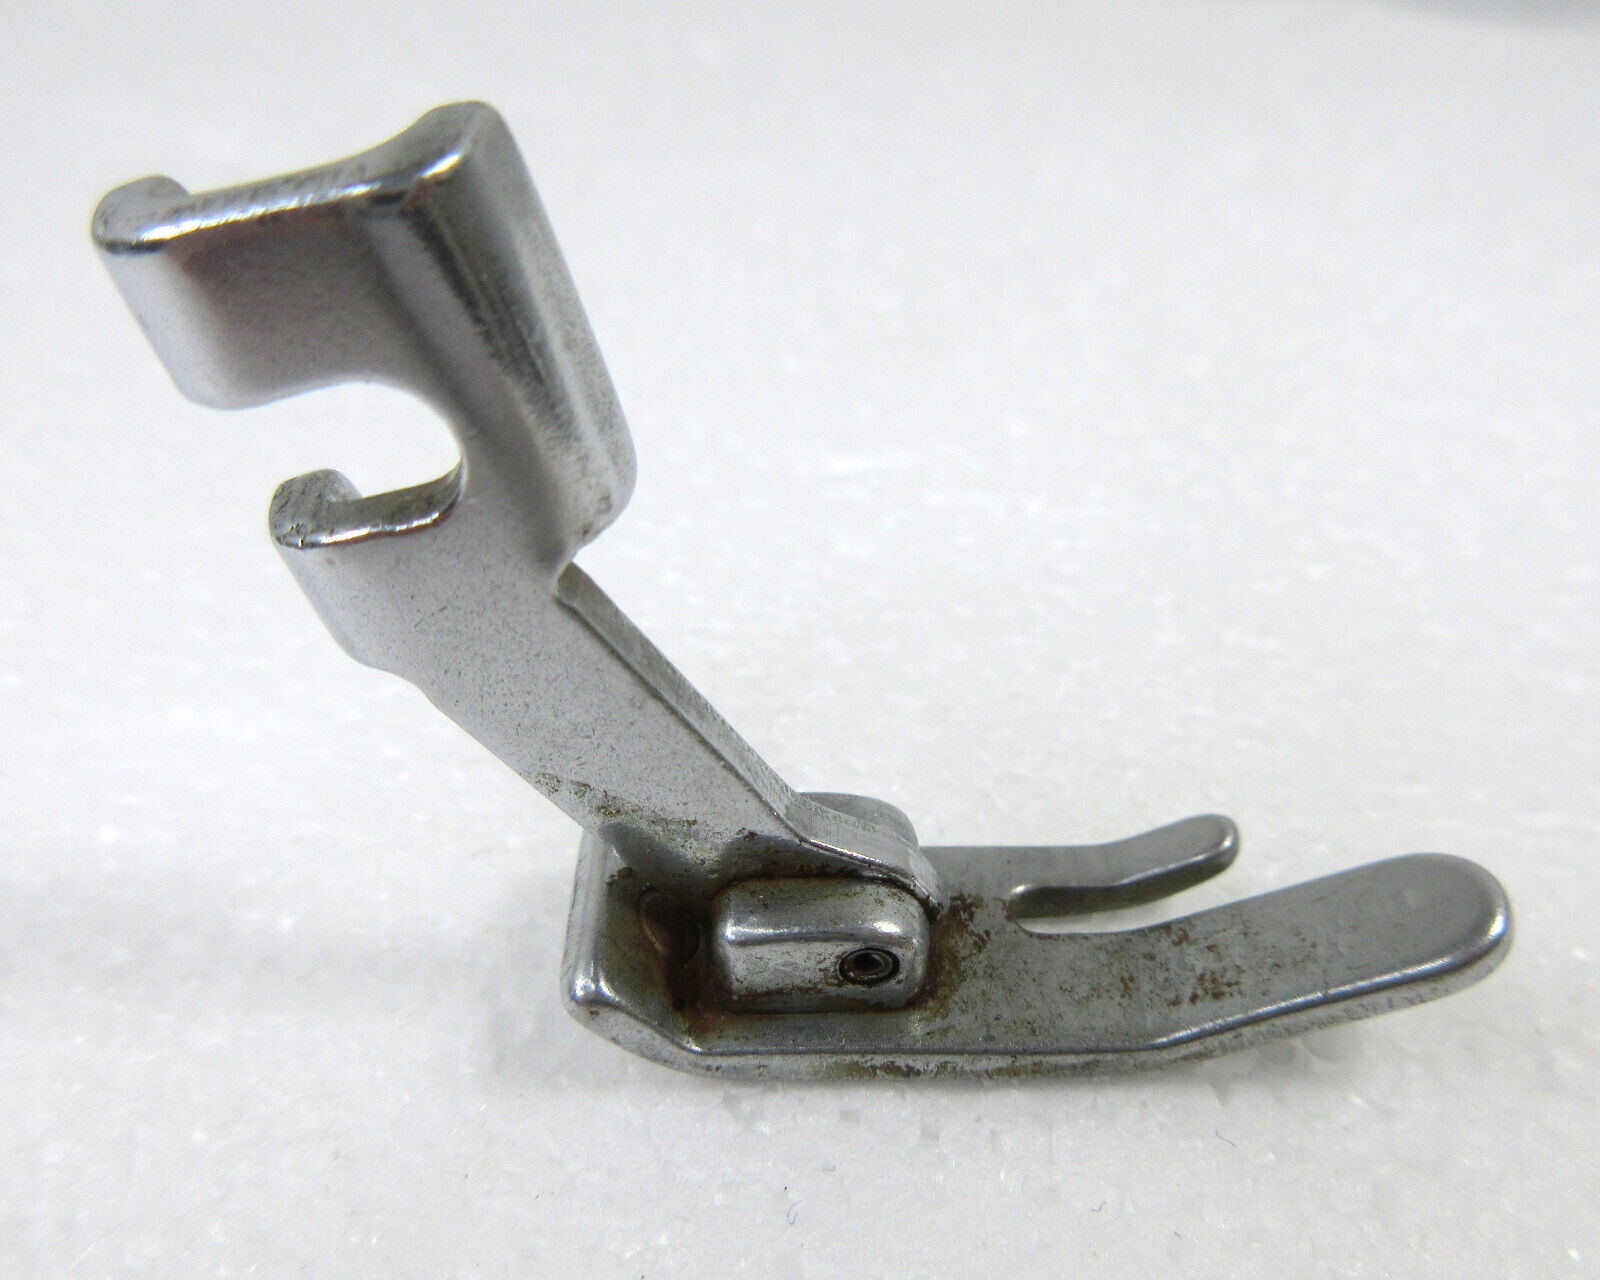 Singer Simanco Sewing Machine Straight Stitch Foot 170071 Replacement Attachment - $9.85